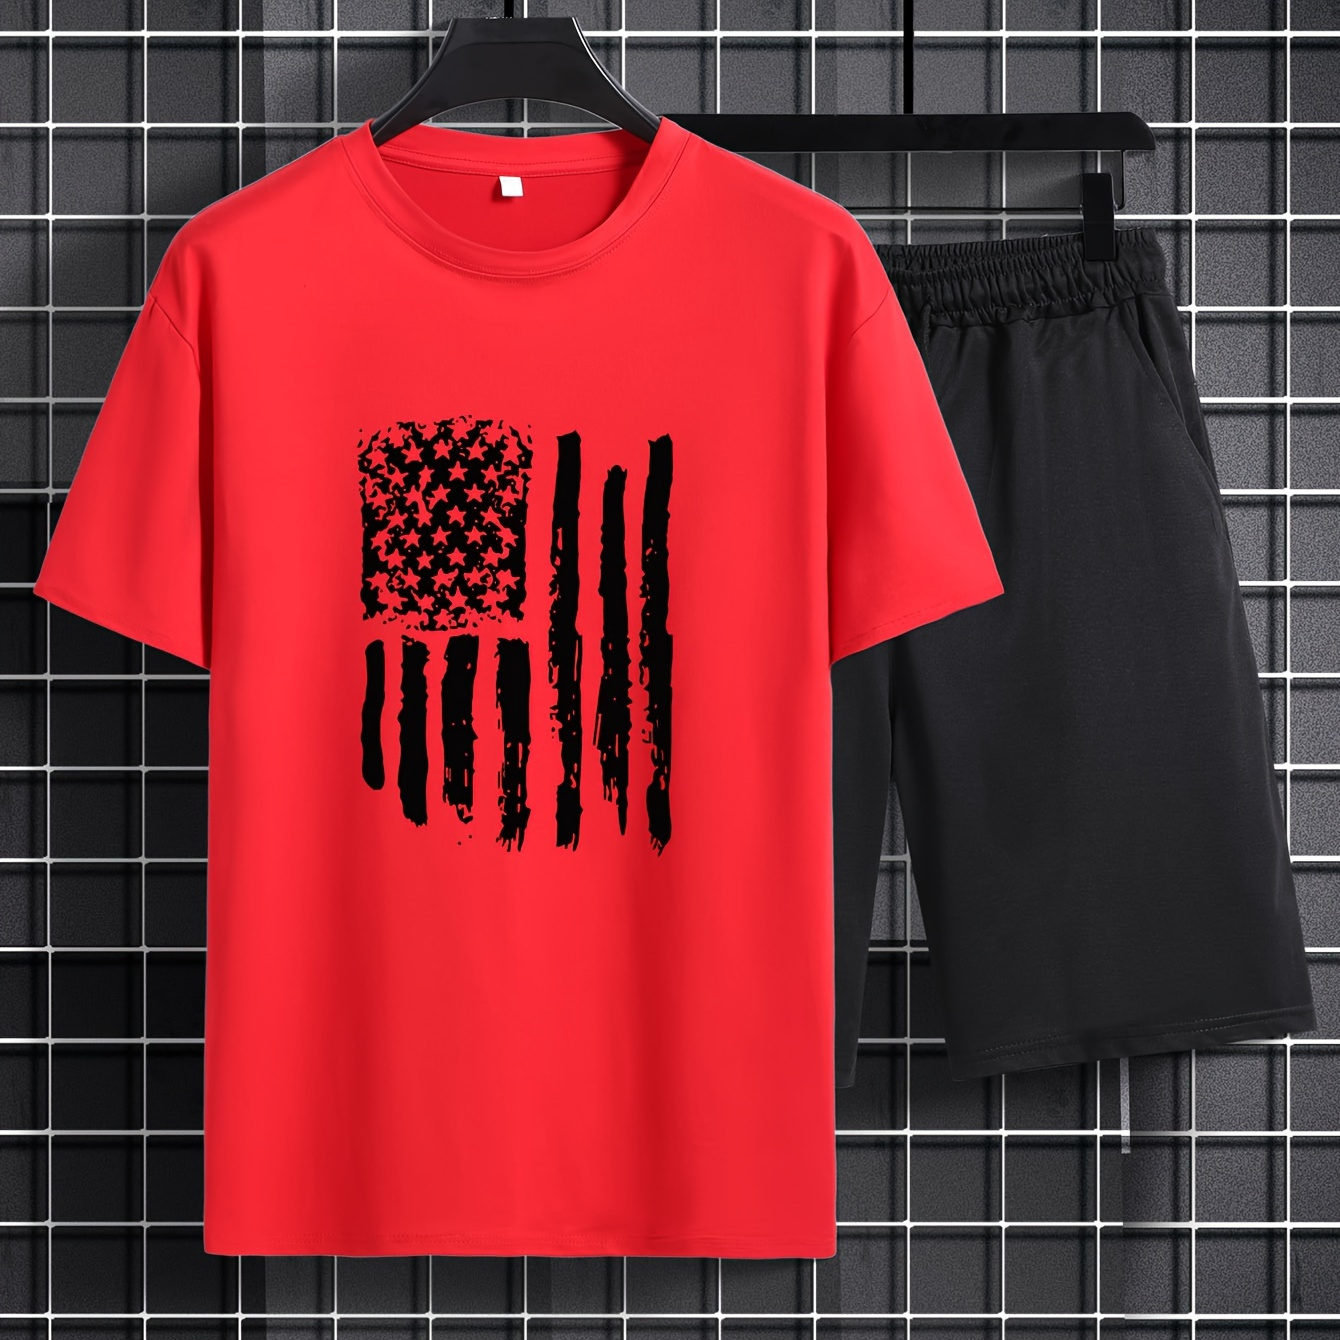 

Faded Flag Print, Mens 2 Piece Outfits, Comfy Short Sleeve T-shirt And Casual Drawstring Shorts Set For Summer, Men's Clothing